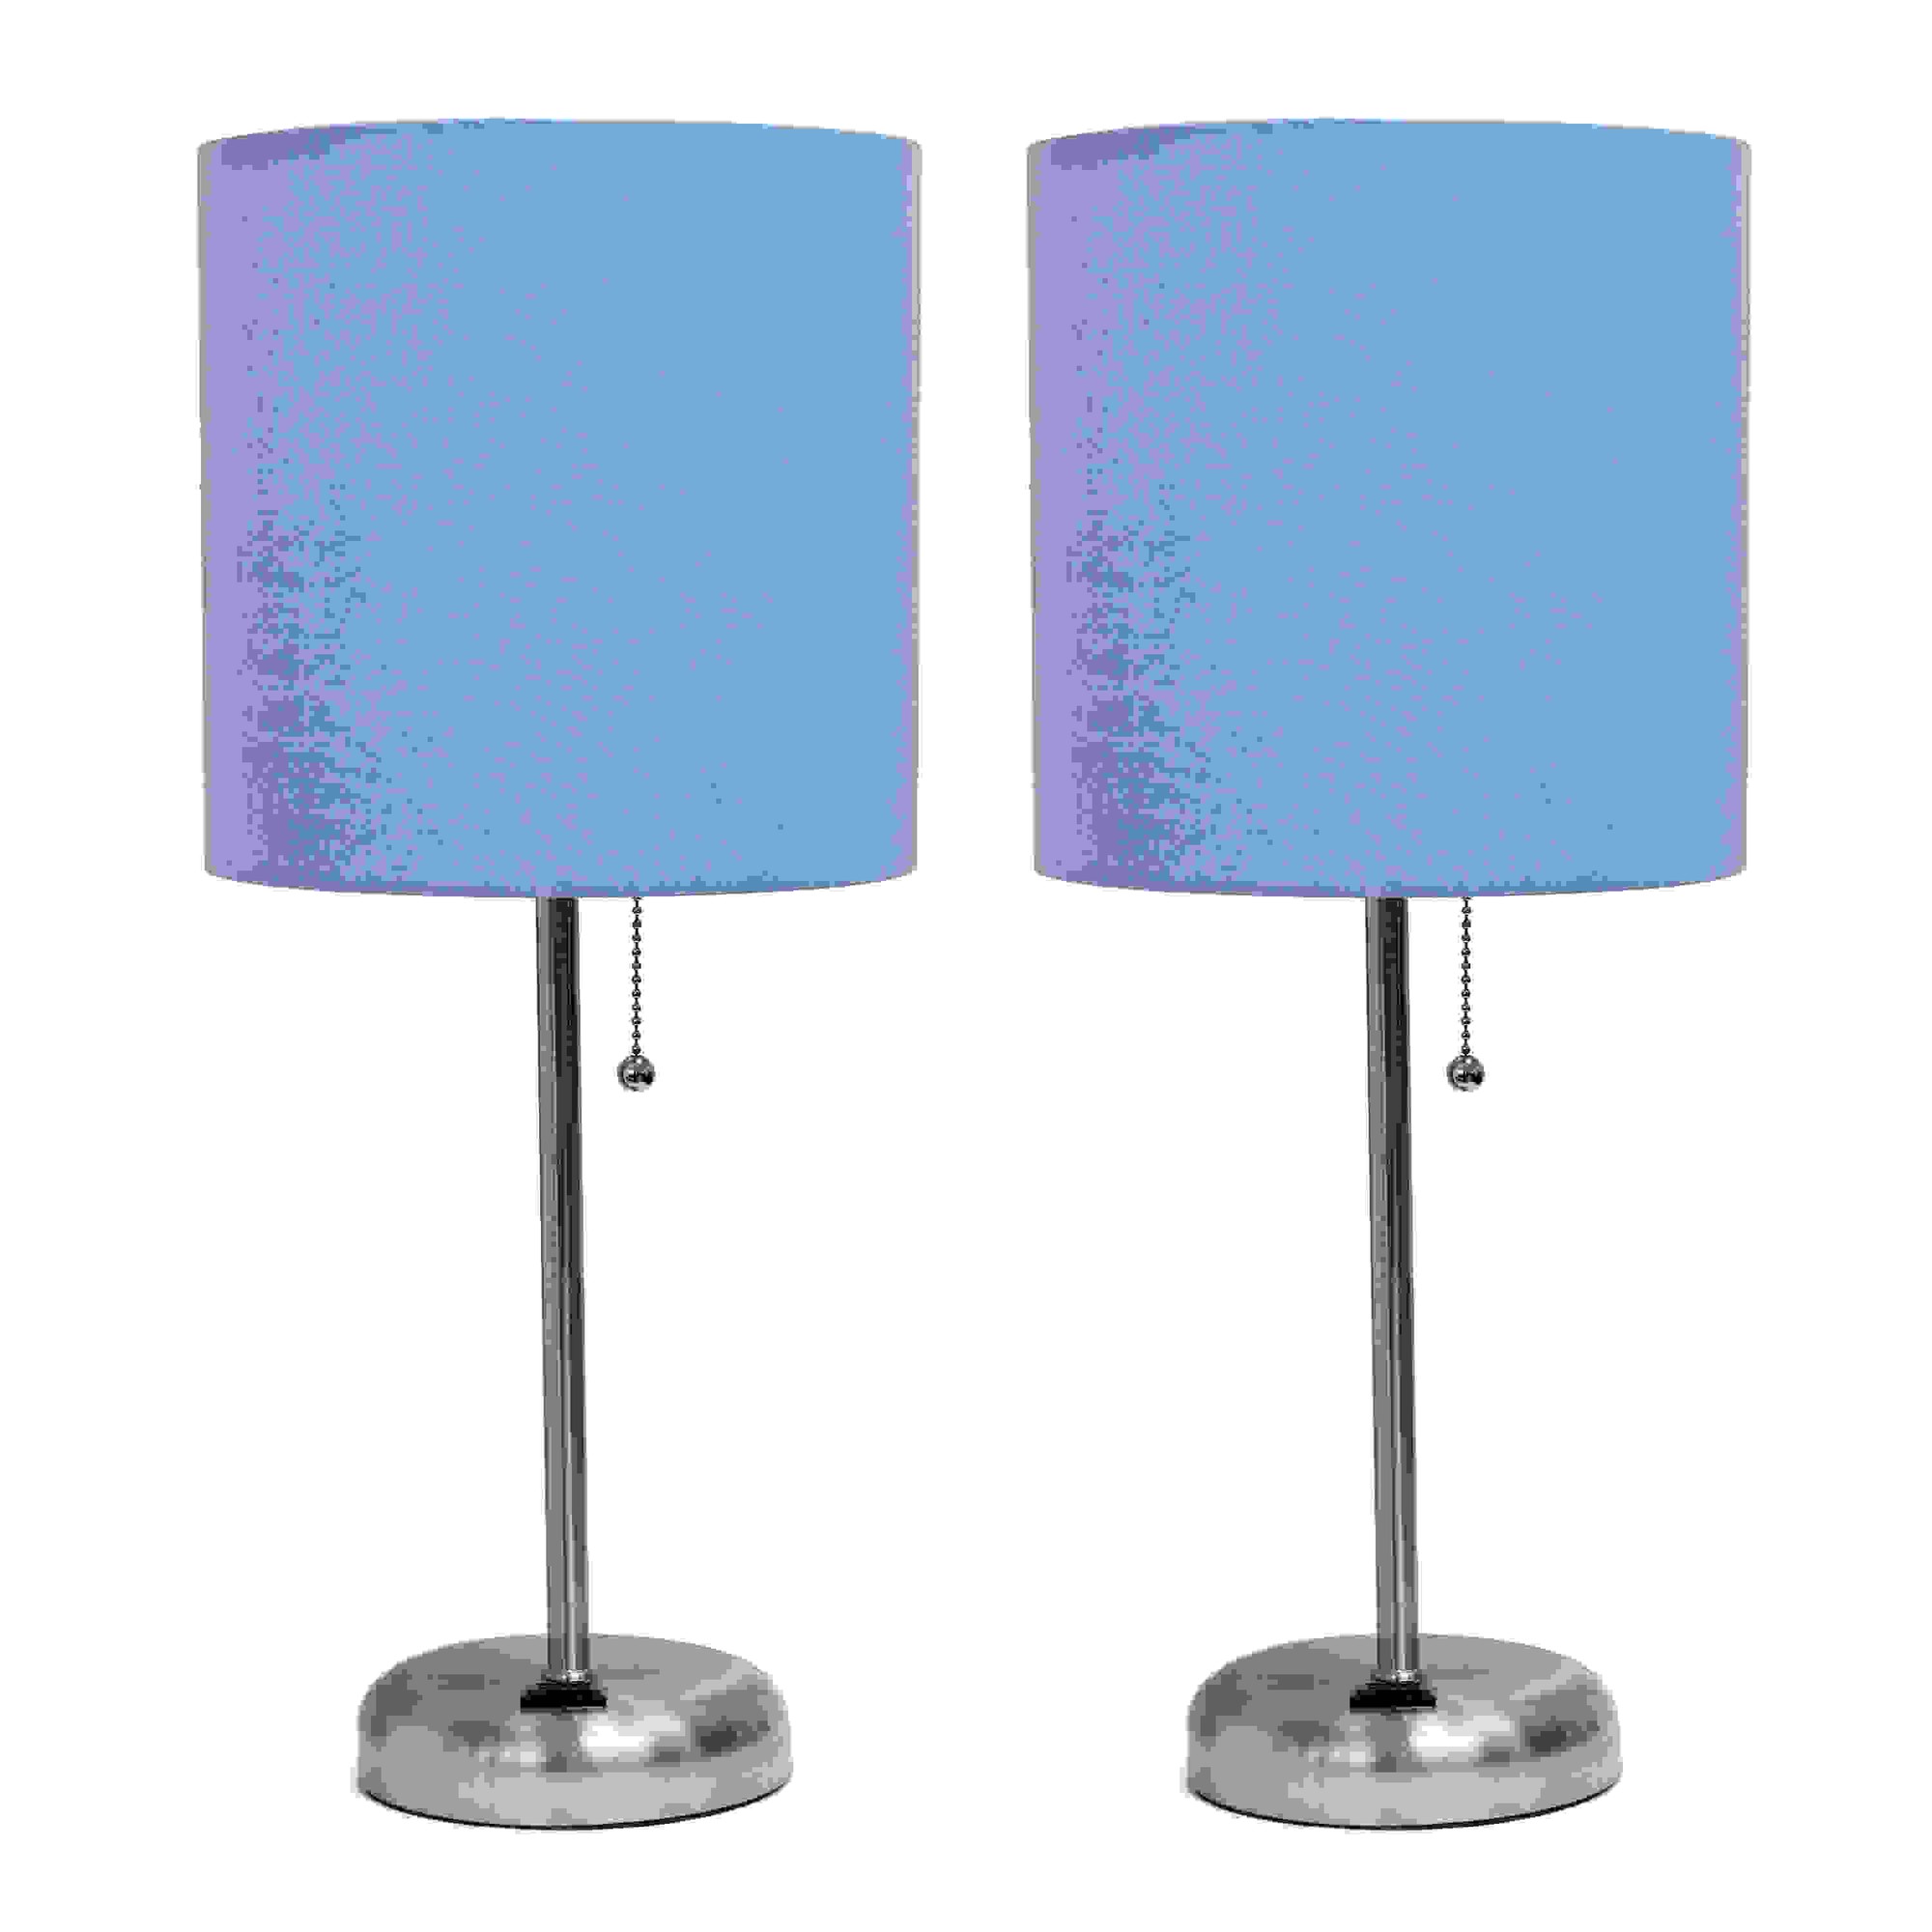 Simple Designs Brushed Steel Stick Lamp with Charging Outlet and Fabric Shade 2 Pack Set, Blue